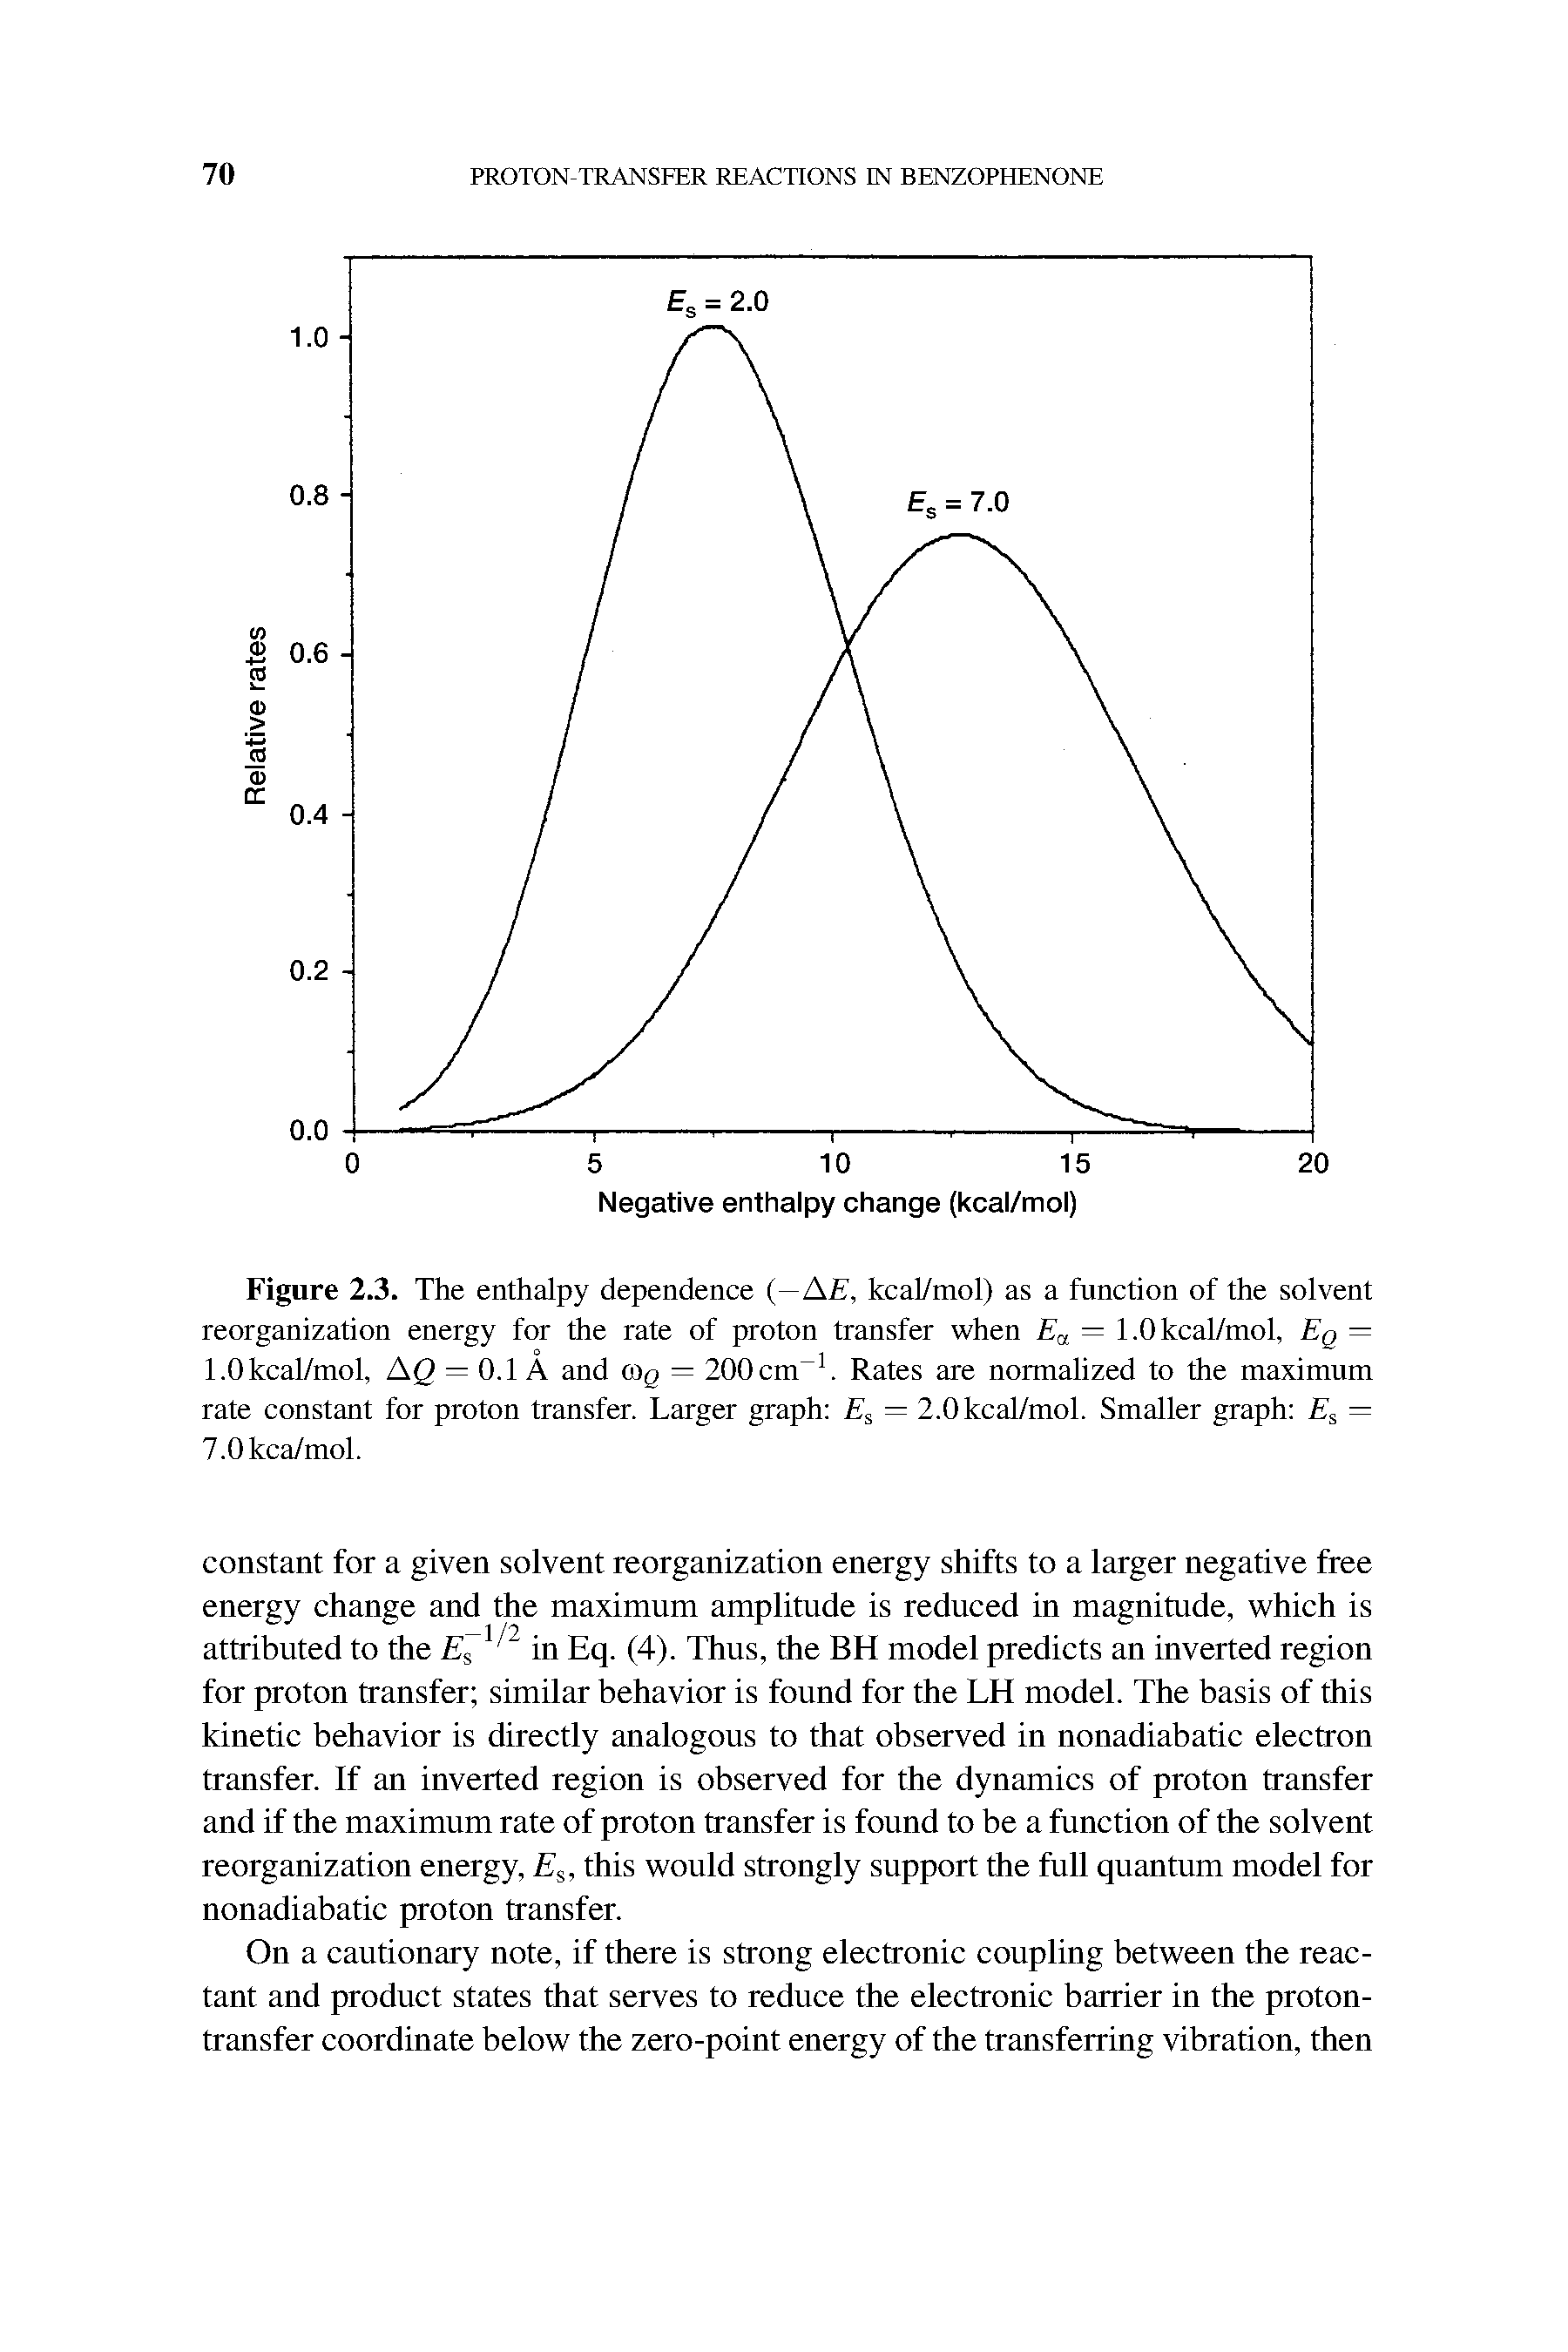 Figure 2.3. The enthalpy dependence (—AE, kcal/mol) as a function of the solvent reorganization energy for the rate of proton transfer when Ea — 1.0 kcal/mol, Eq = 1.0 kcal/mol, AQ — 0.1 A and Gig = 200 cm-1. Rates are normalized to the maximum rate constant for proton transfer. Larger graph Es = 2.0 kcal/mol. Smaller graph Es = 7.0kca/mol.